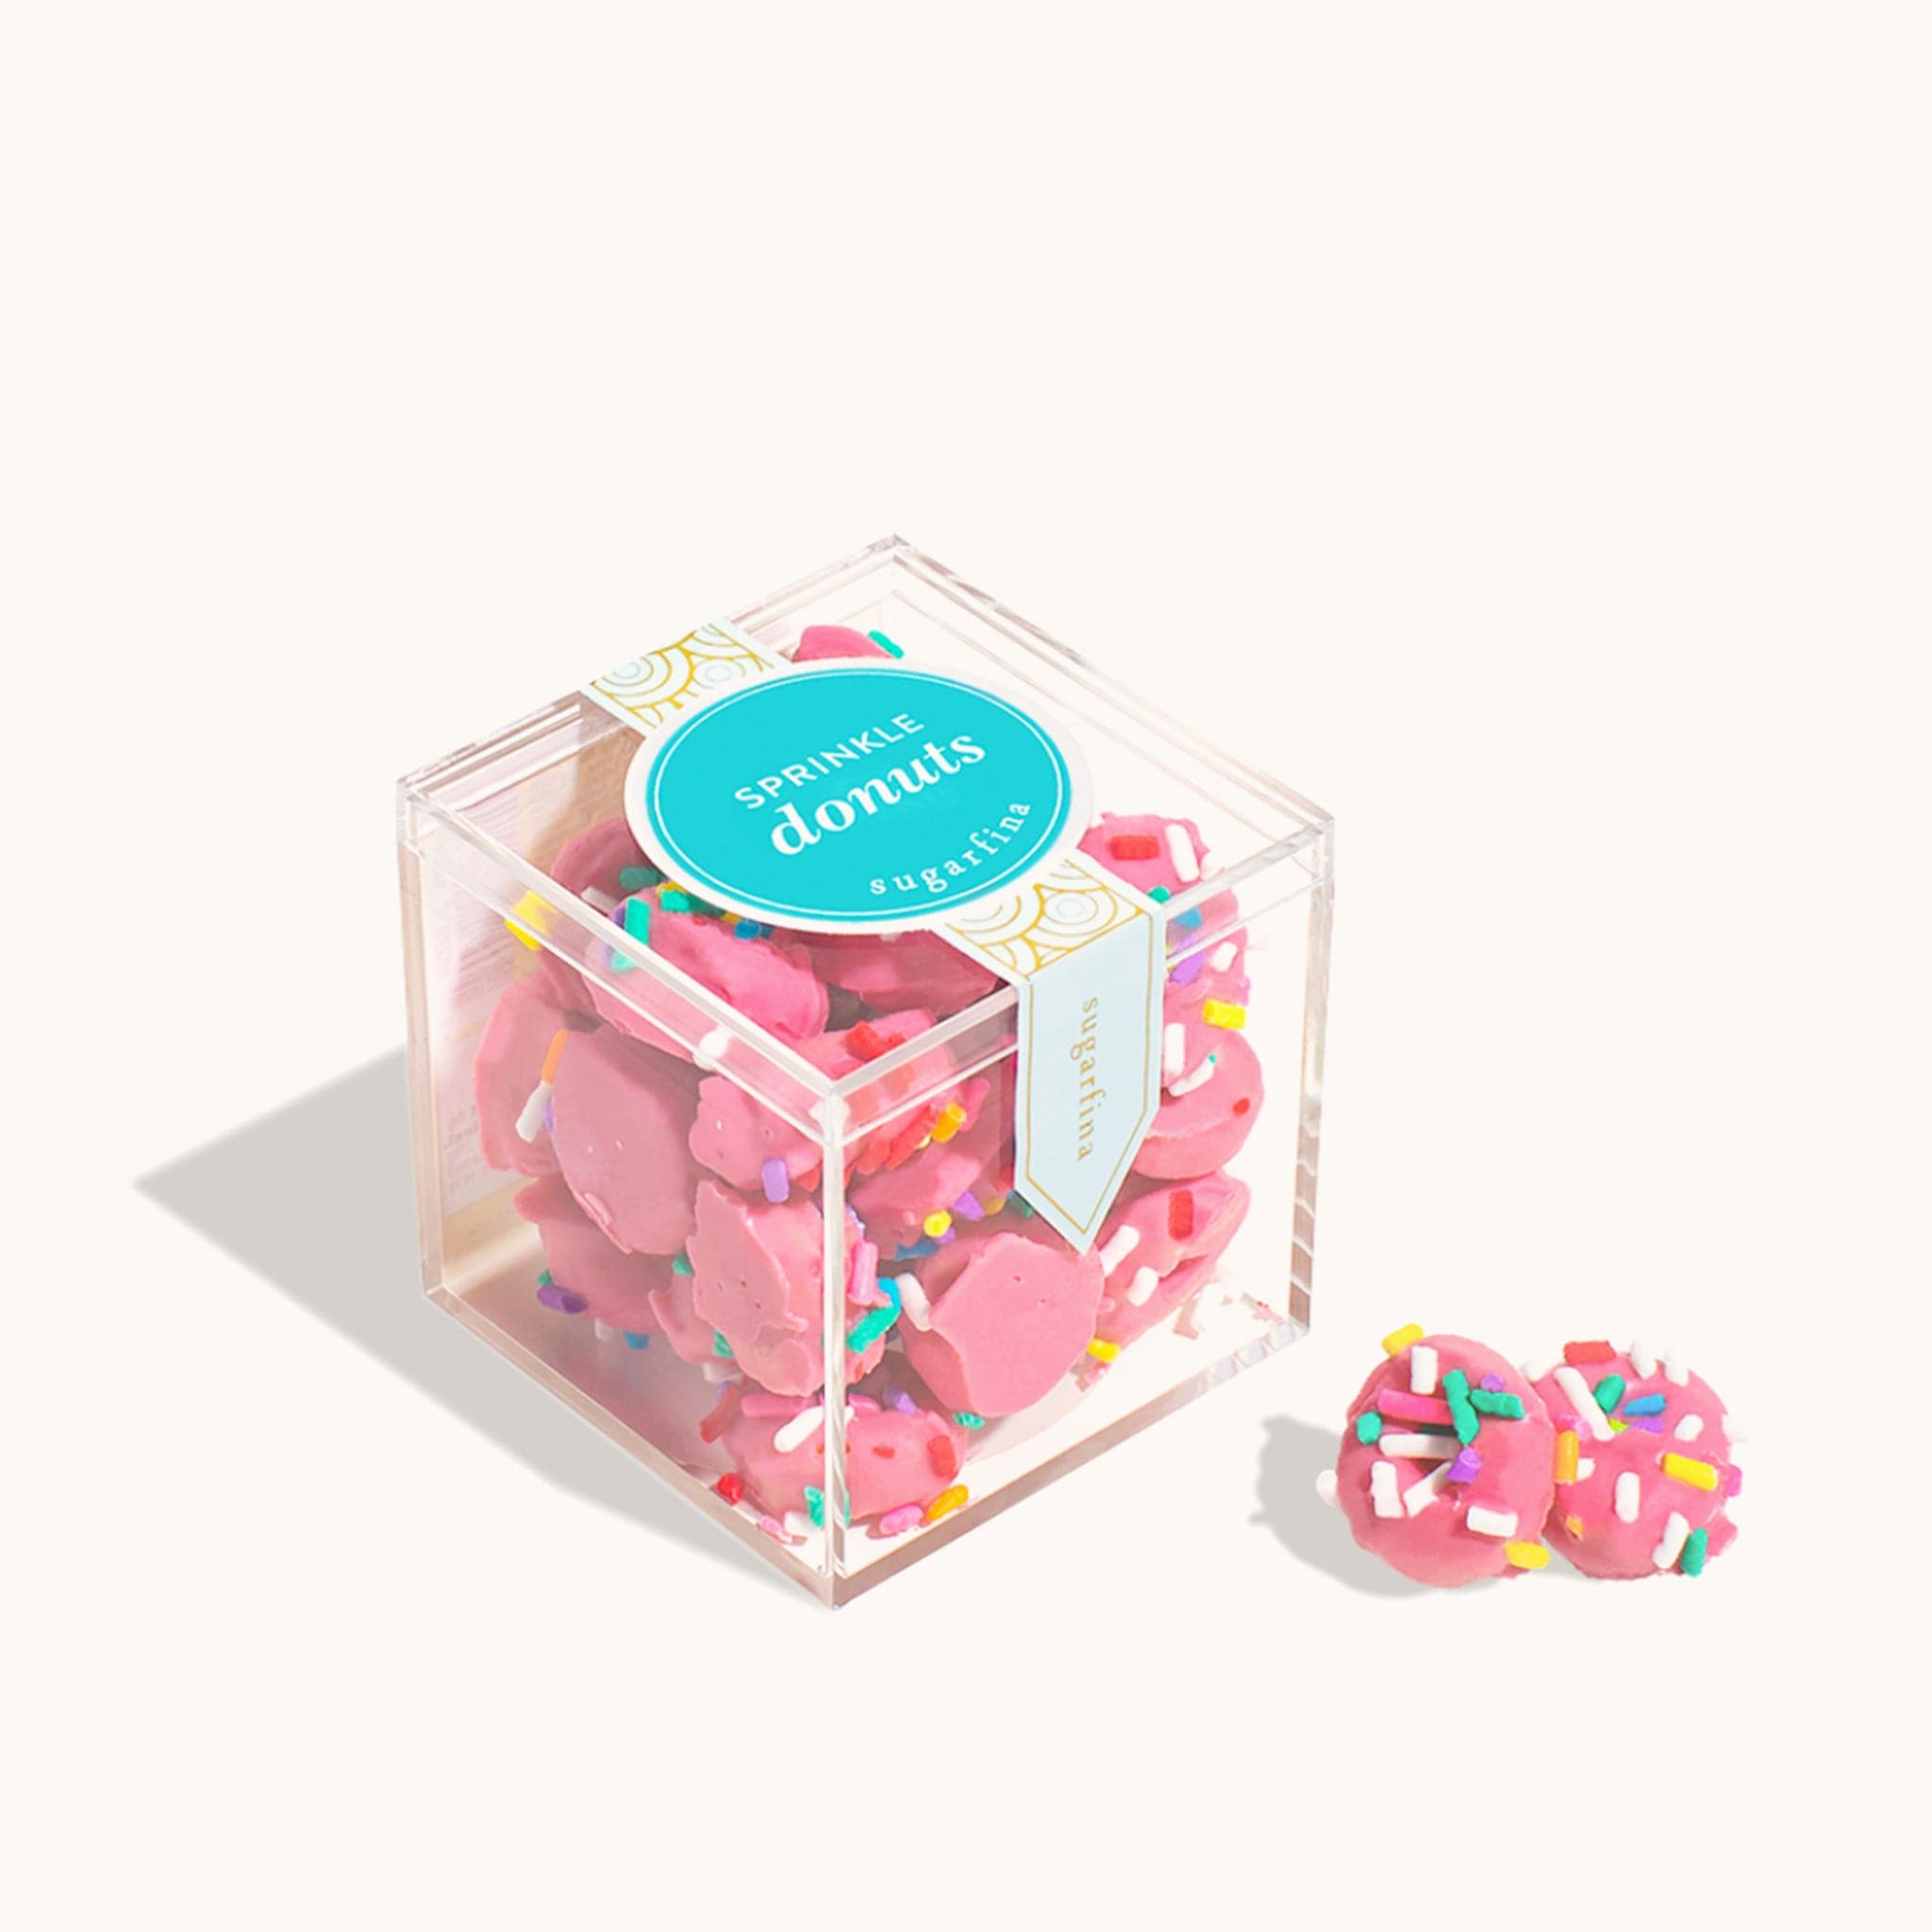 Plastic cube of miniature pink donut candies topped with colorful sprinkles. The box reads &#39;Sprinkle donuts&#39; across a teal circular logo. Two donut candies are placed in front of the box. 